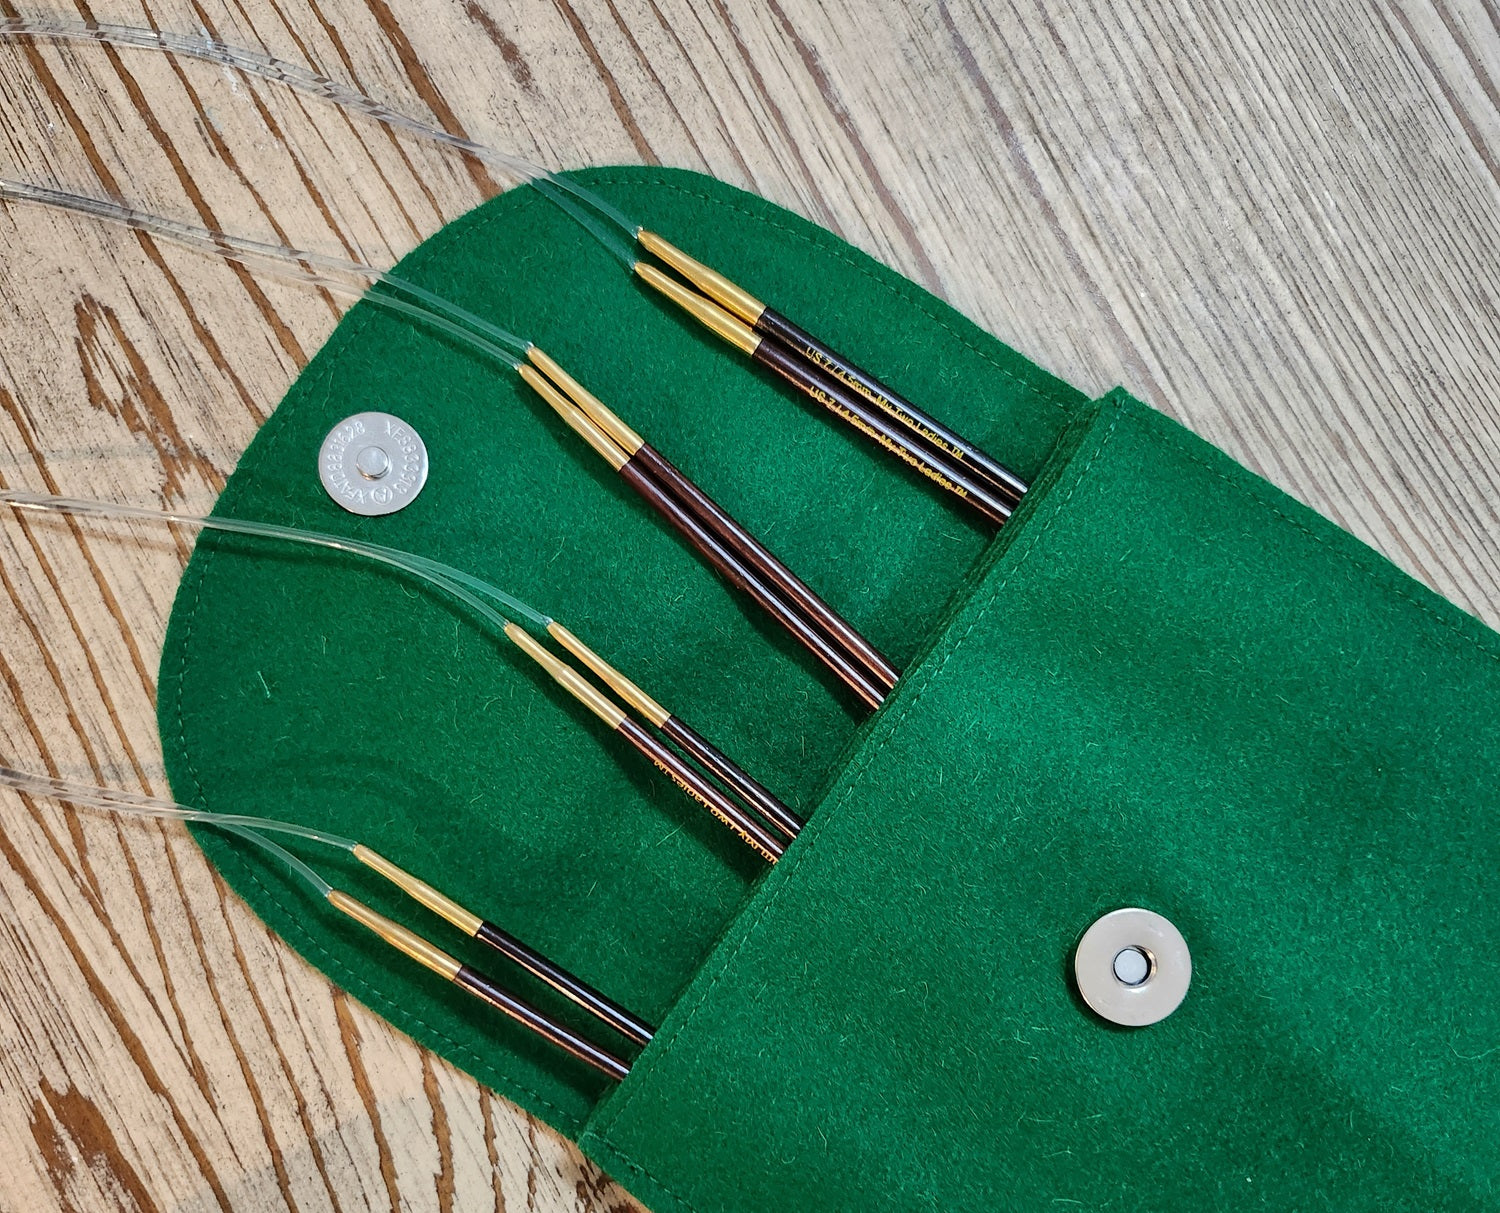 9 inch Circular Knitting Needles Set US Size 10, Size 9, Size 8, Size 7,  Size 6 with Premium USA-Made tubing Brilliant Knitting BR